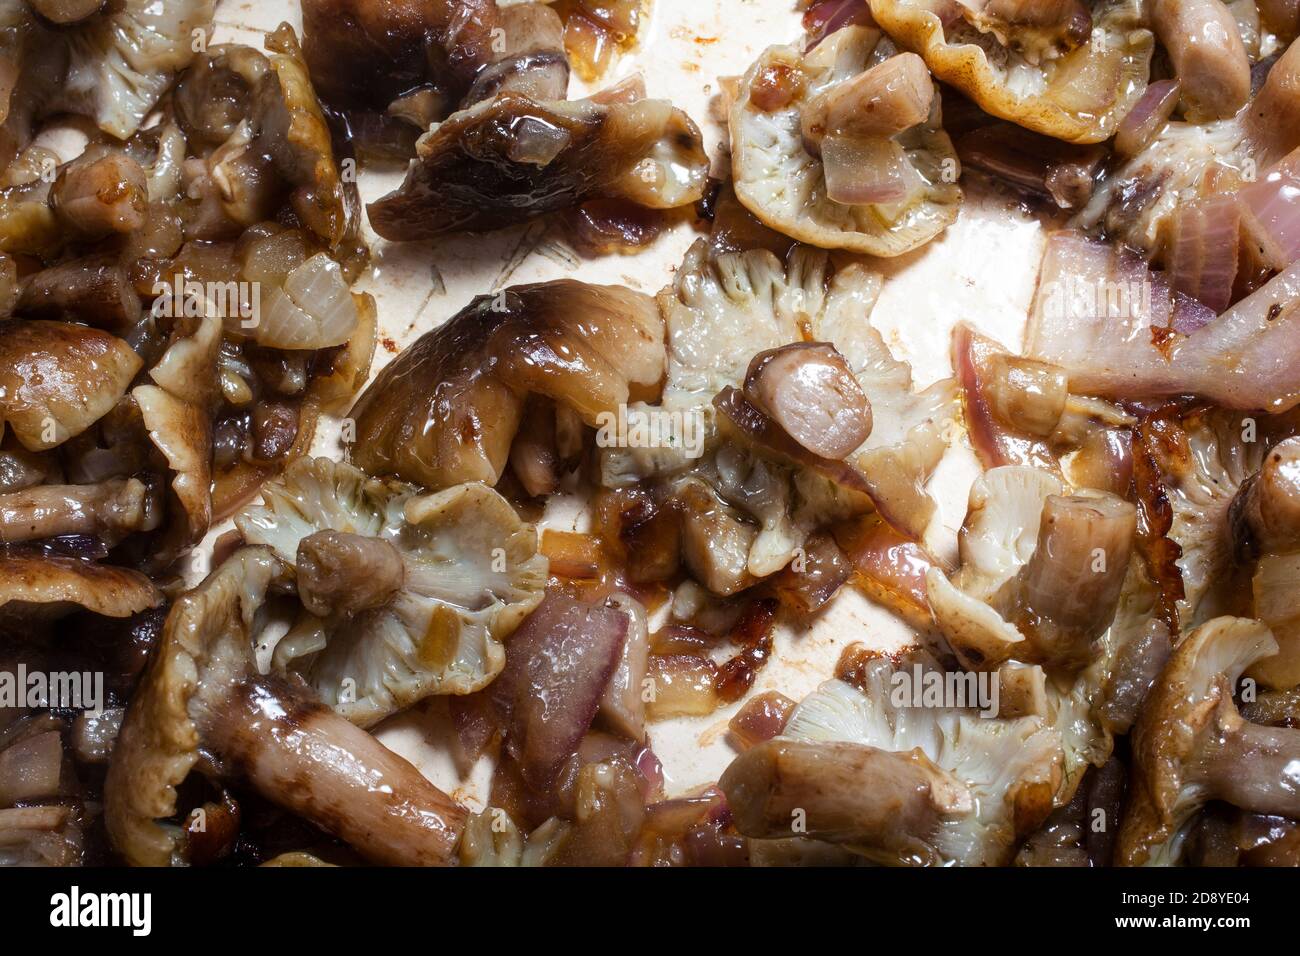 Detail Photo From Above ofSheathed Wood Tuft Mushroom Tops With Onion Baked in Olive Oil Stock Photo